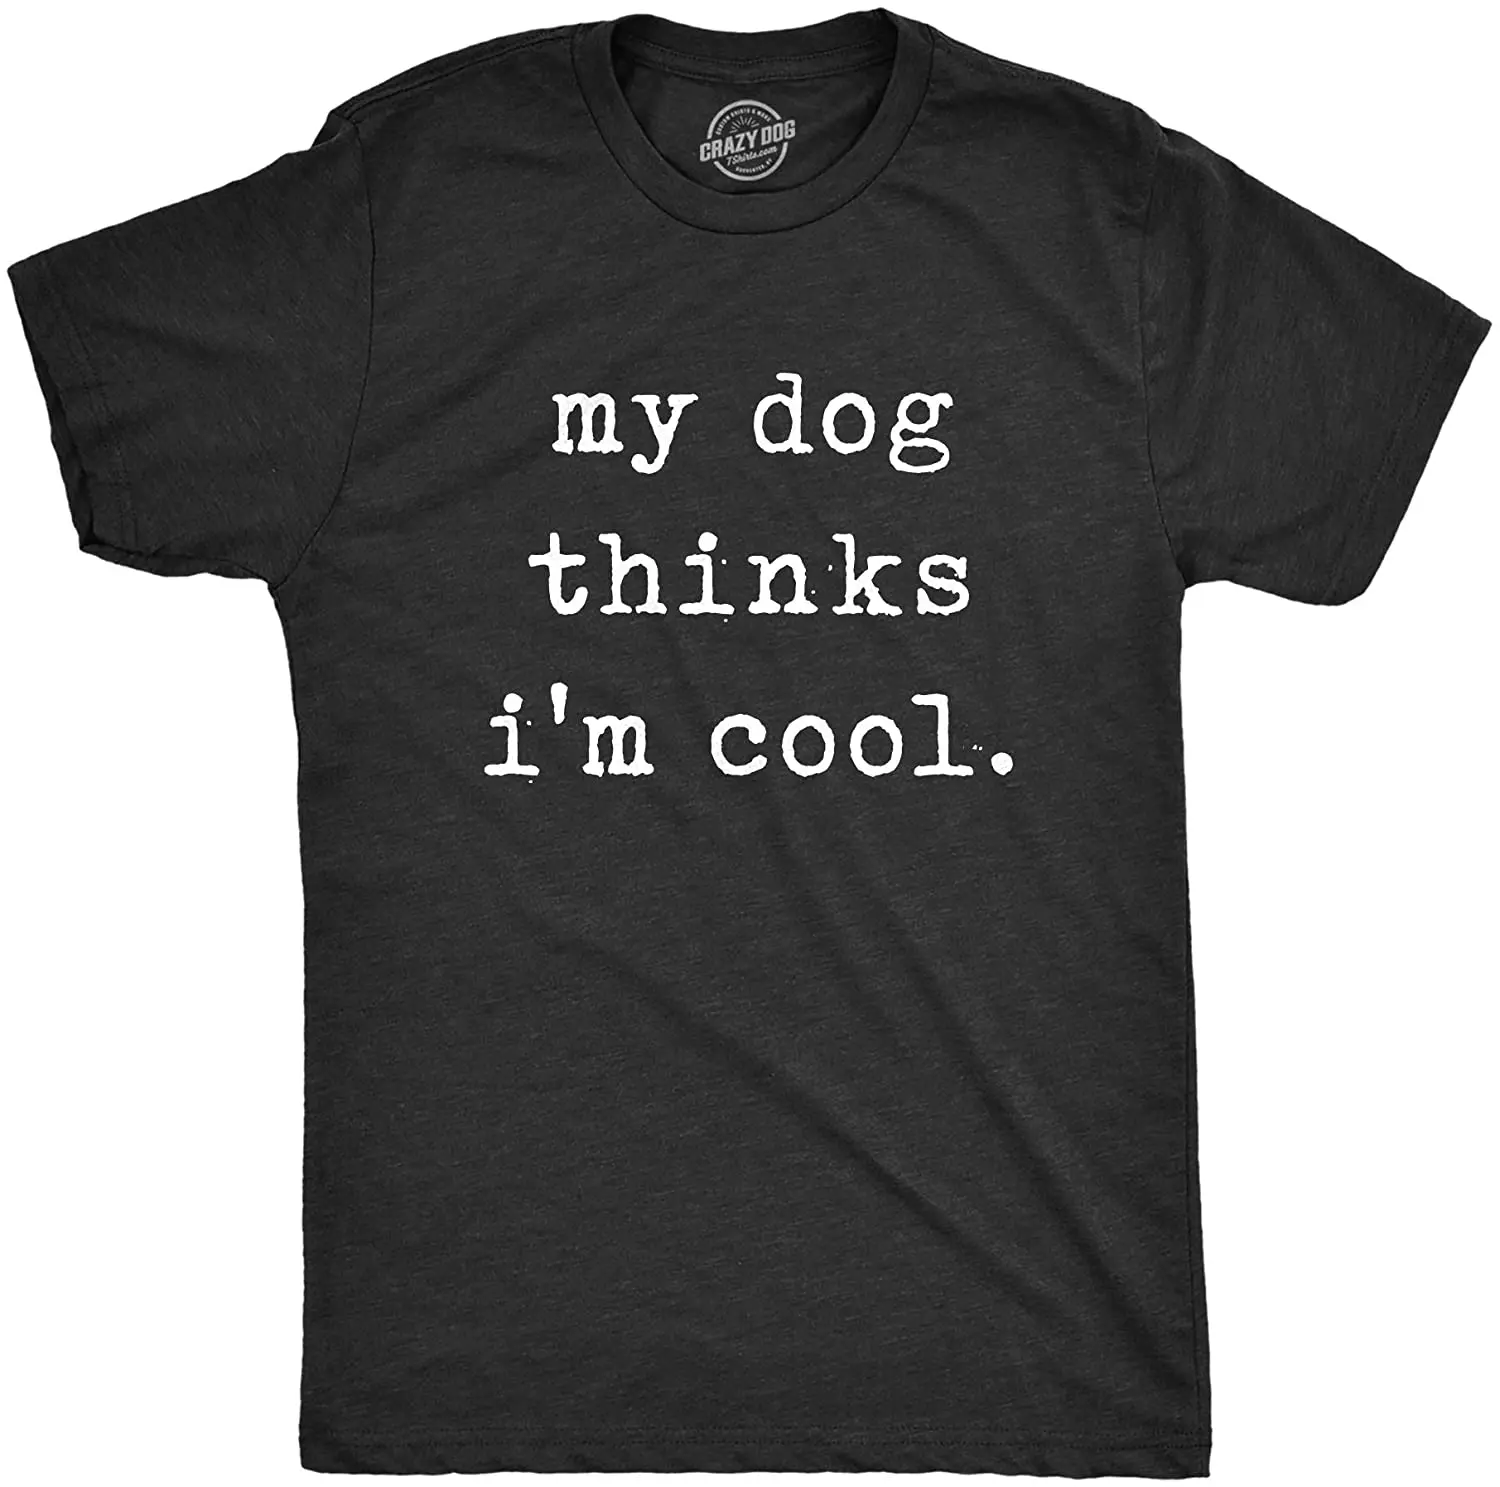 

Mens My Dog Thinks Im Cool T Shirt Funny Sarcastic Humor Novelty Puppy Tee